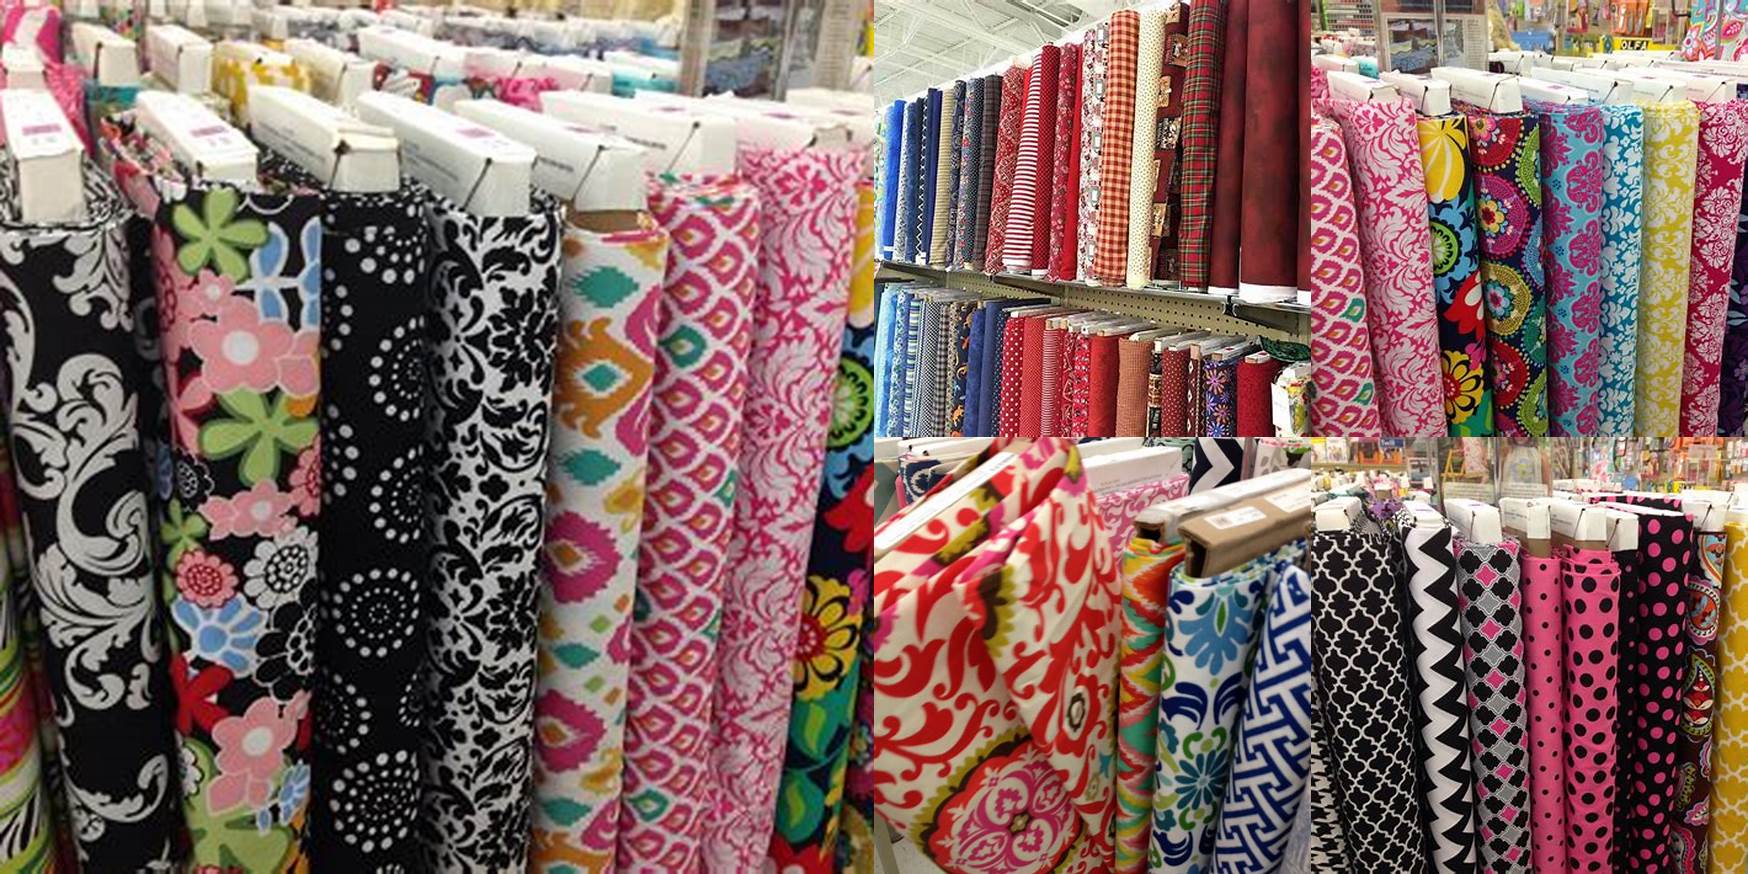 How Much Is Fabric At Hobby Lobby